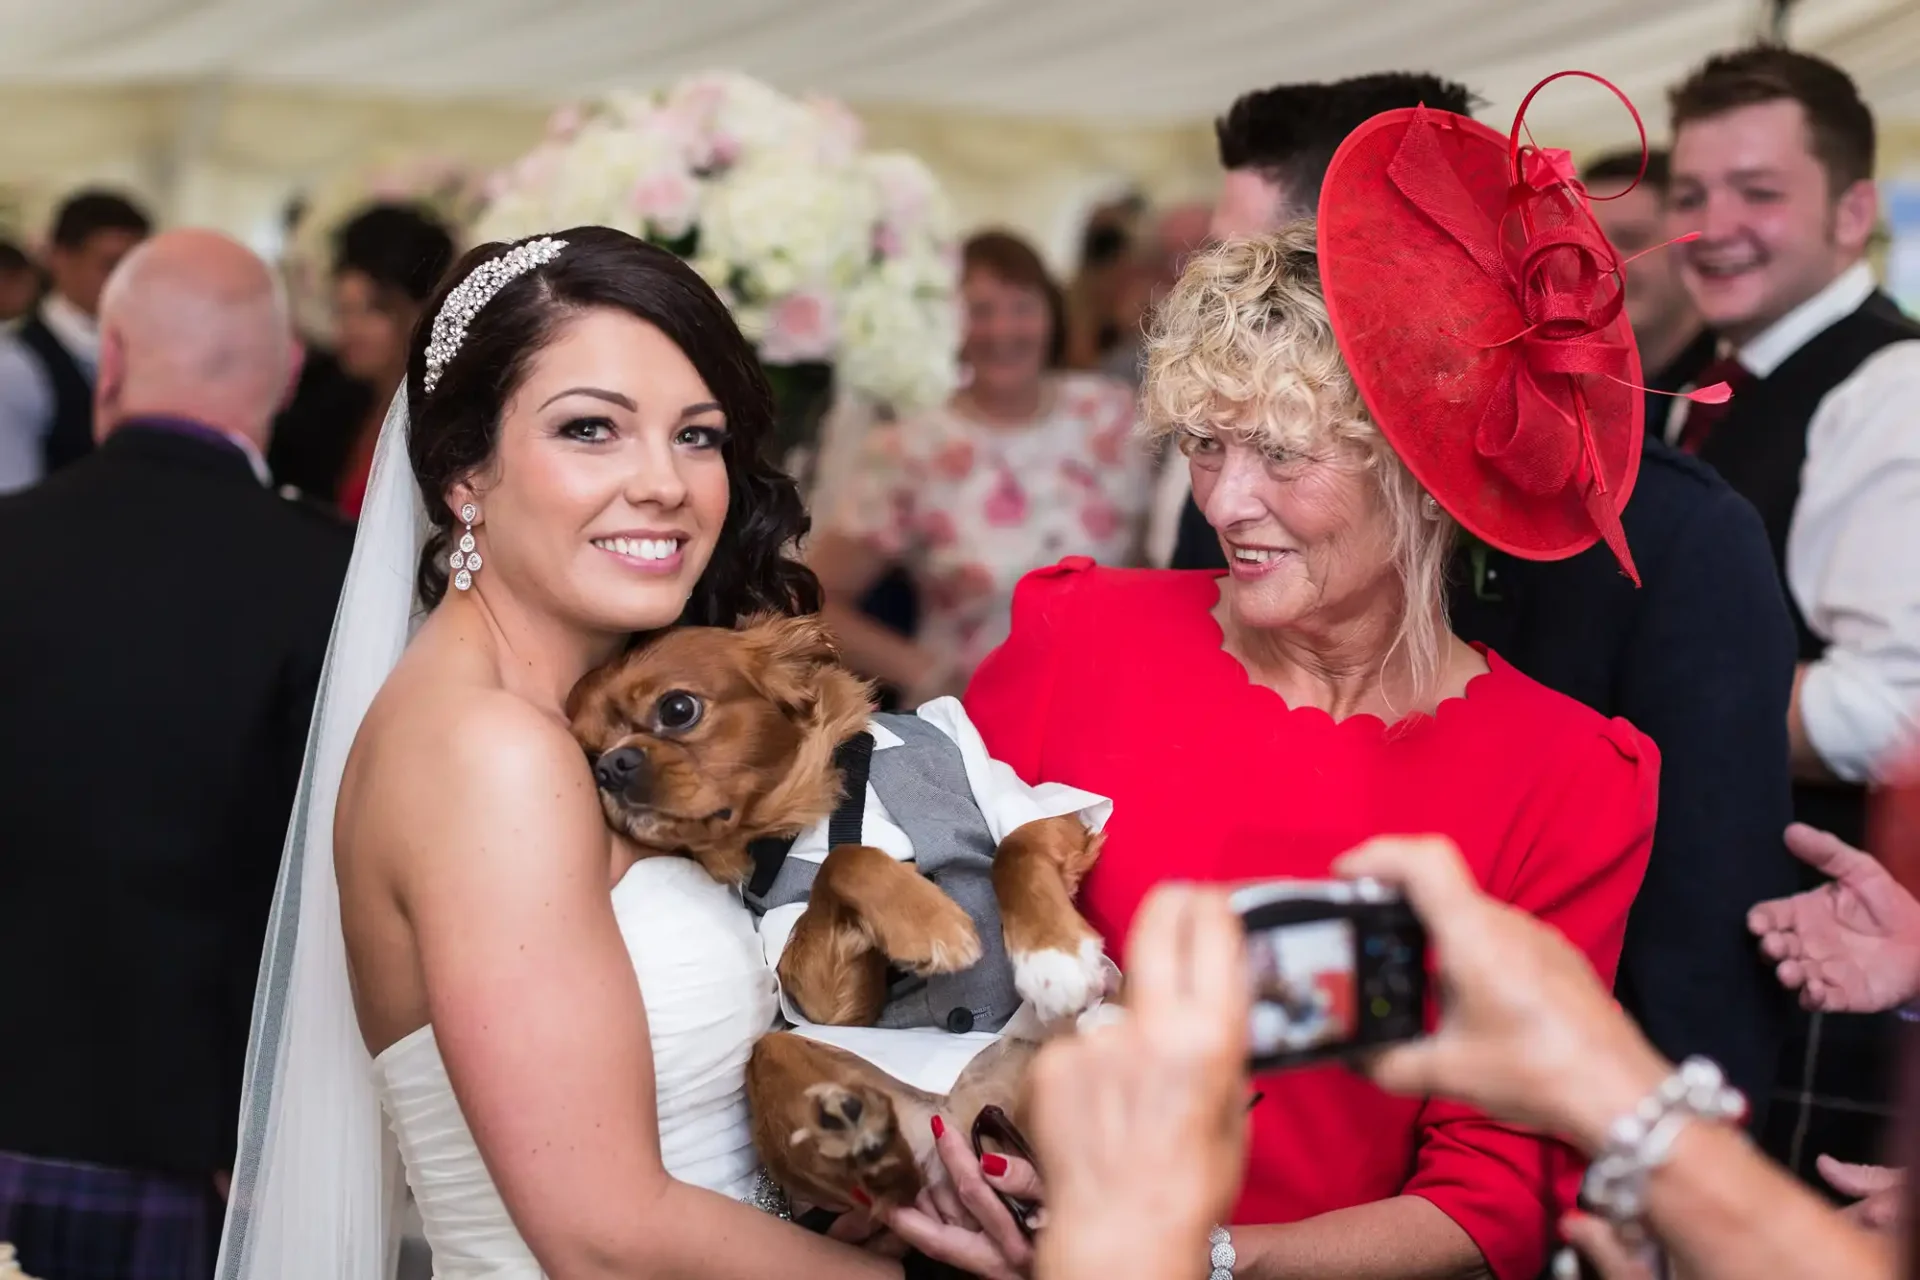 A bride in a white dress holding a small dog, with an older woman in a red outfit and hat smiling at her, in a crowded event tent.